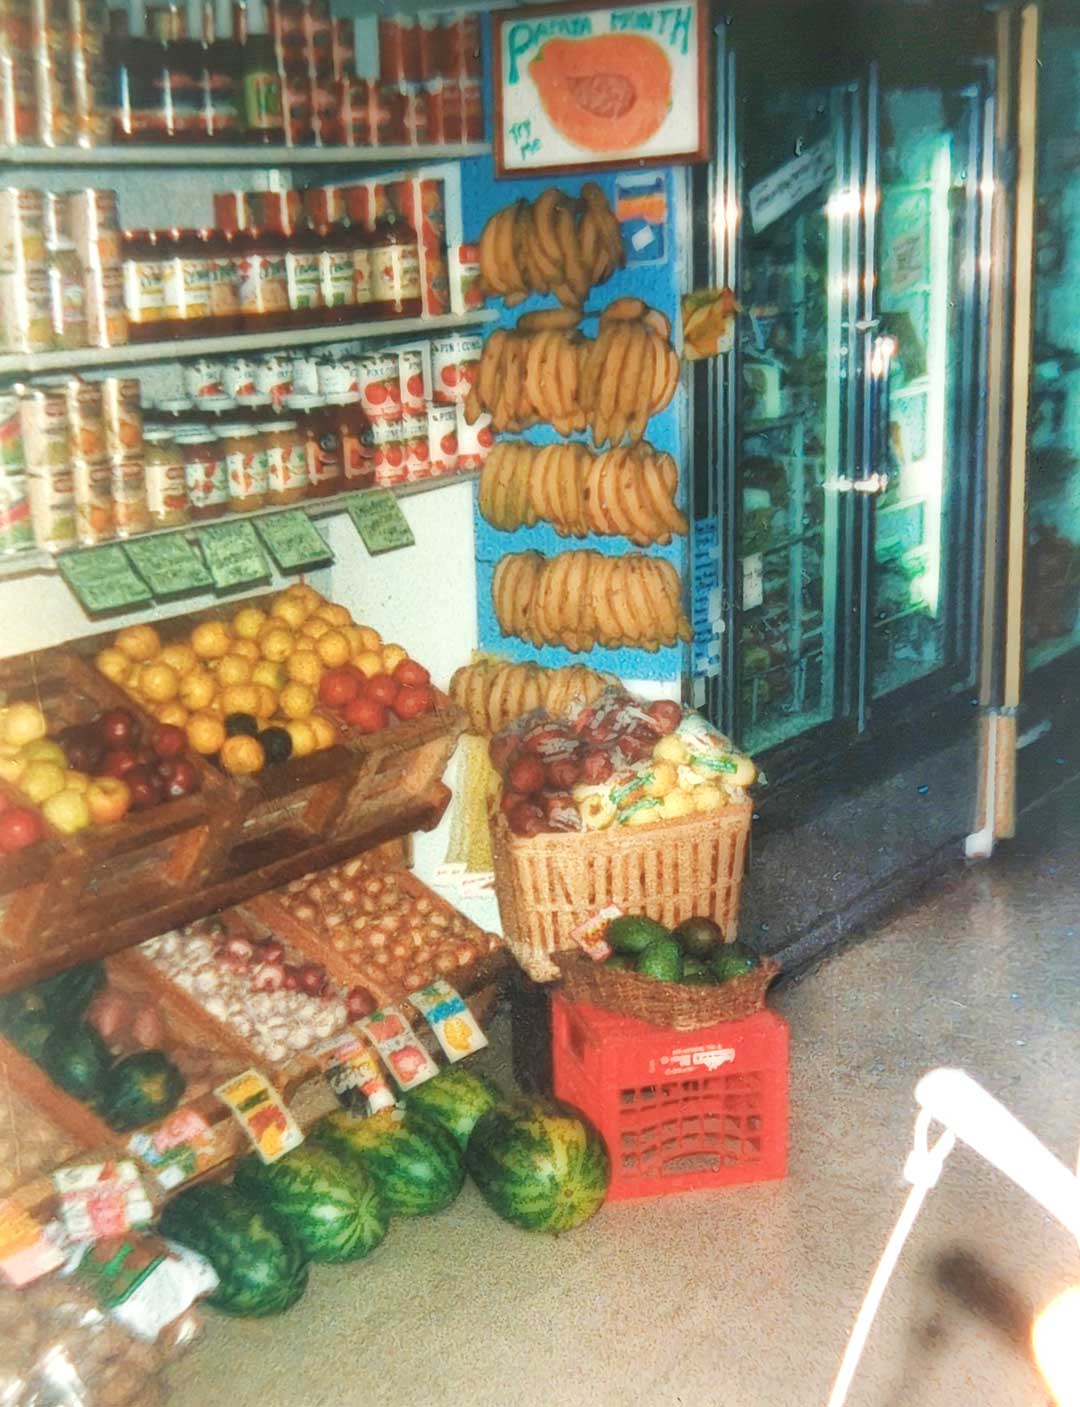 A small grocery store display at Whole Foods Coop Duluth MN features a variety of fresh fruits and vegetables. Bananas hang from a rack, while apples, lemons, watermelons, and other produce are neatly arranged in baskets and crates. Shelves are stocked with canned goods and jars.